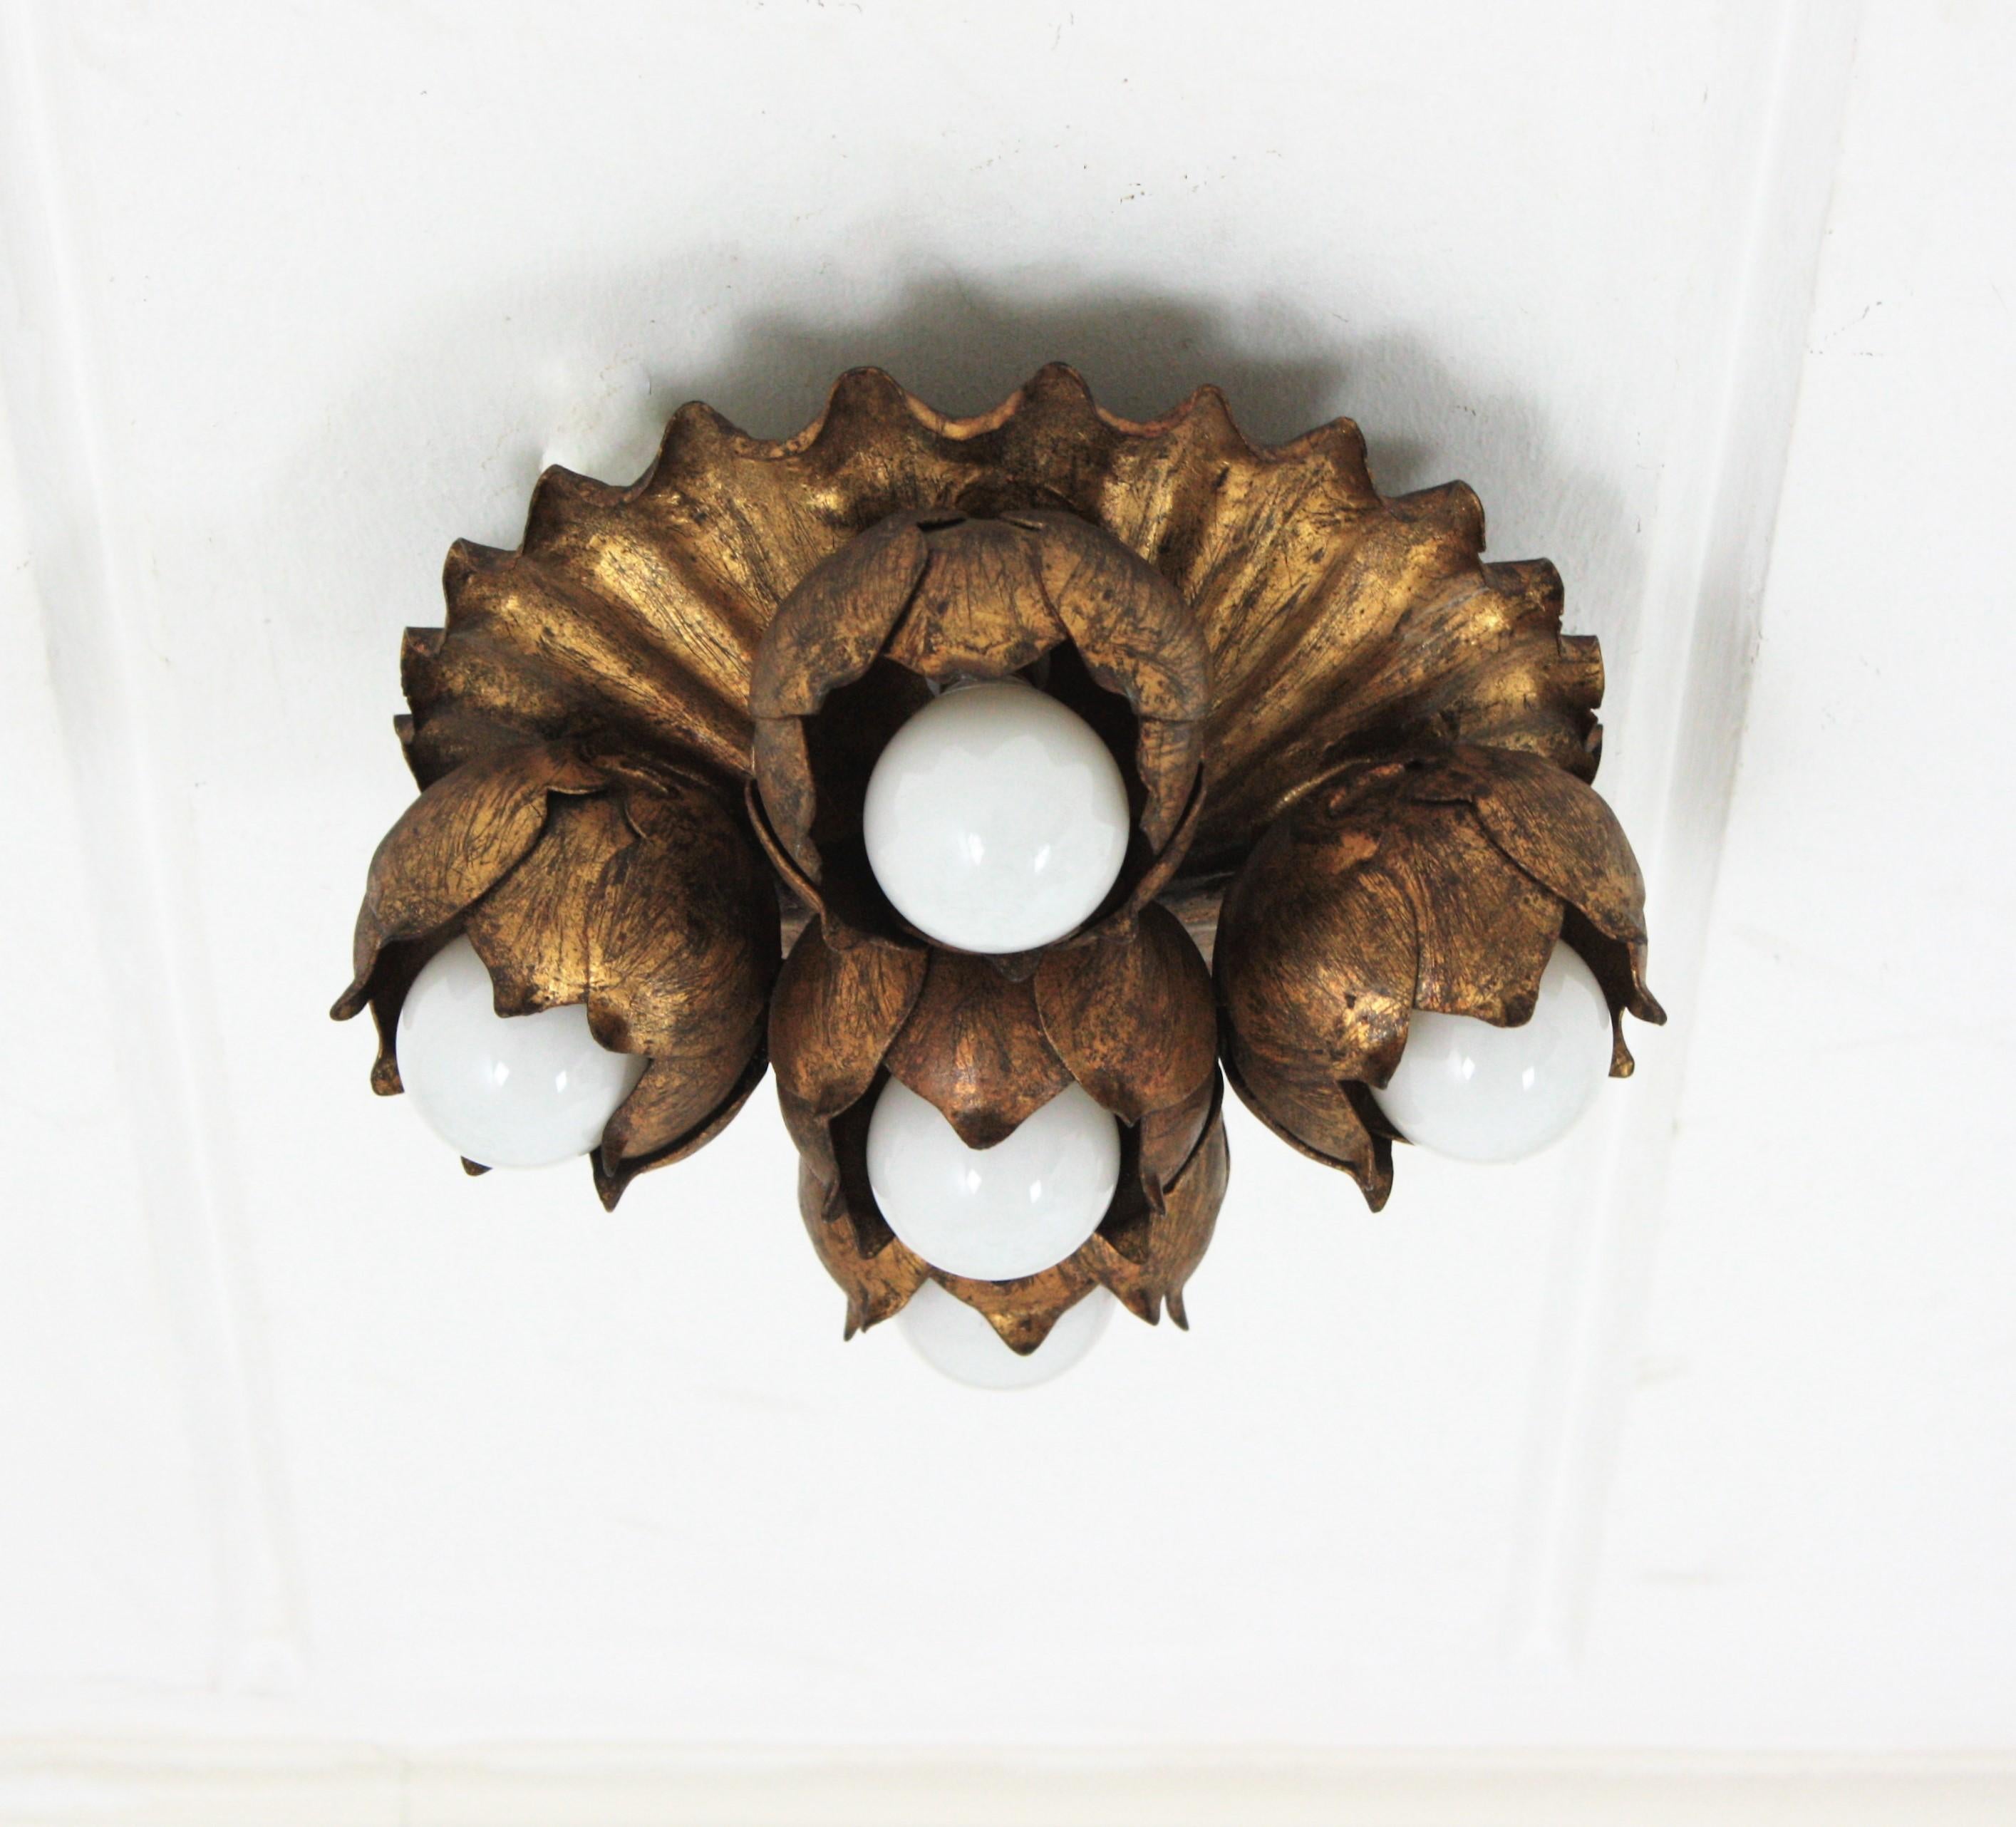 Flower bouquet wall / ceiling light fixture in gilt iron

French 1940s gilt metal five light Floral Bouquet wall or ceiling light fixture. 
A beautiful Hollywood Regency gilt wrought iron floral flush mount or wall sconce. This lovely light